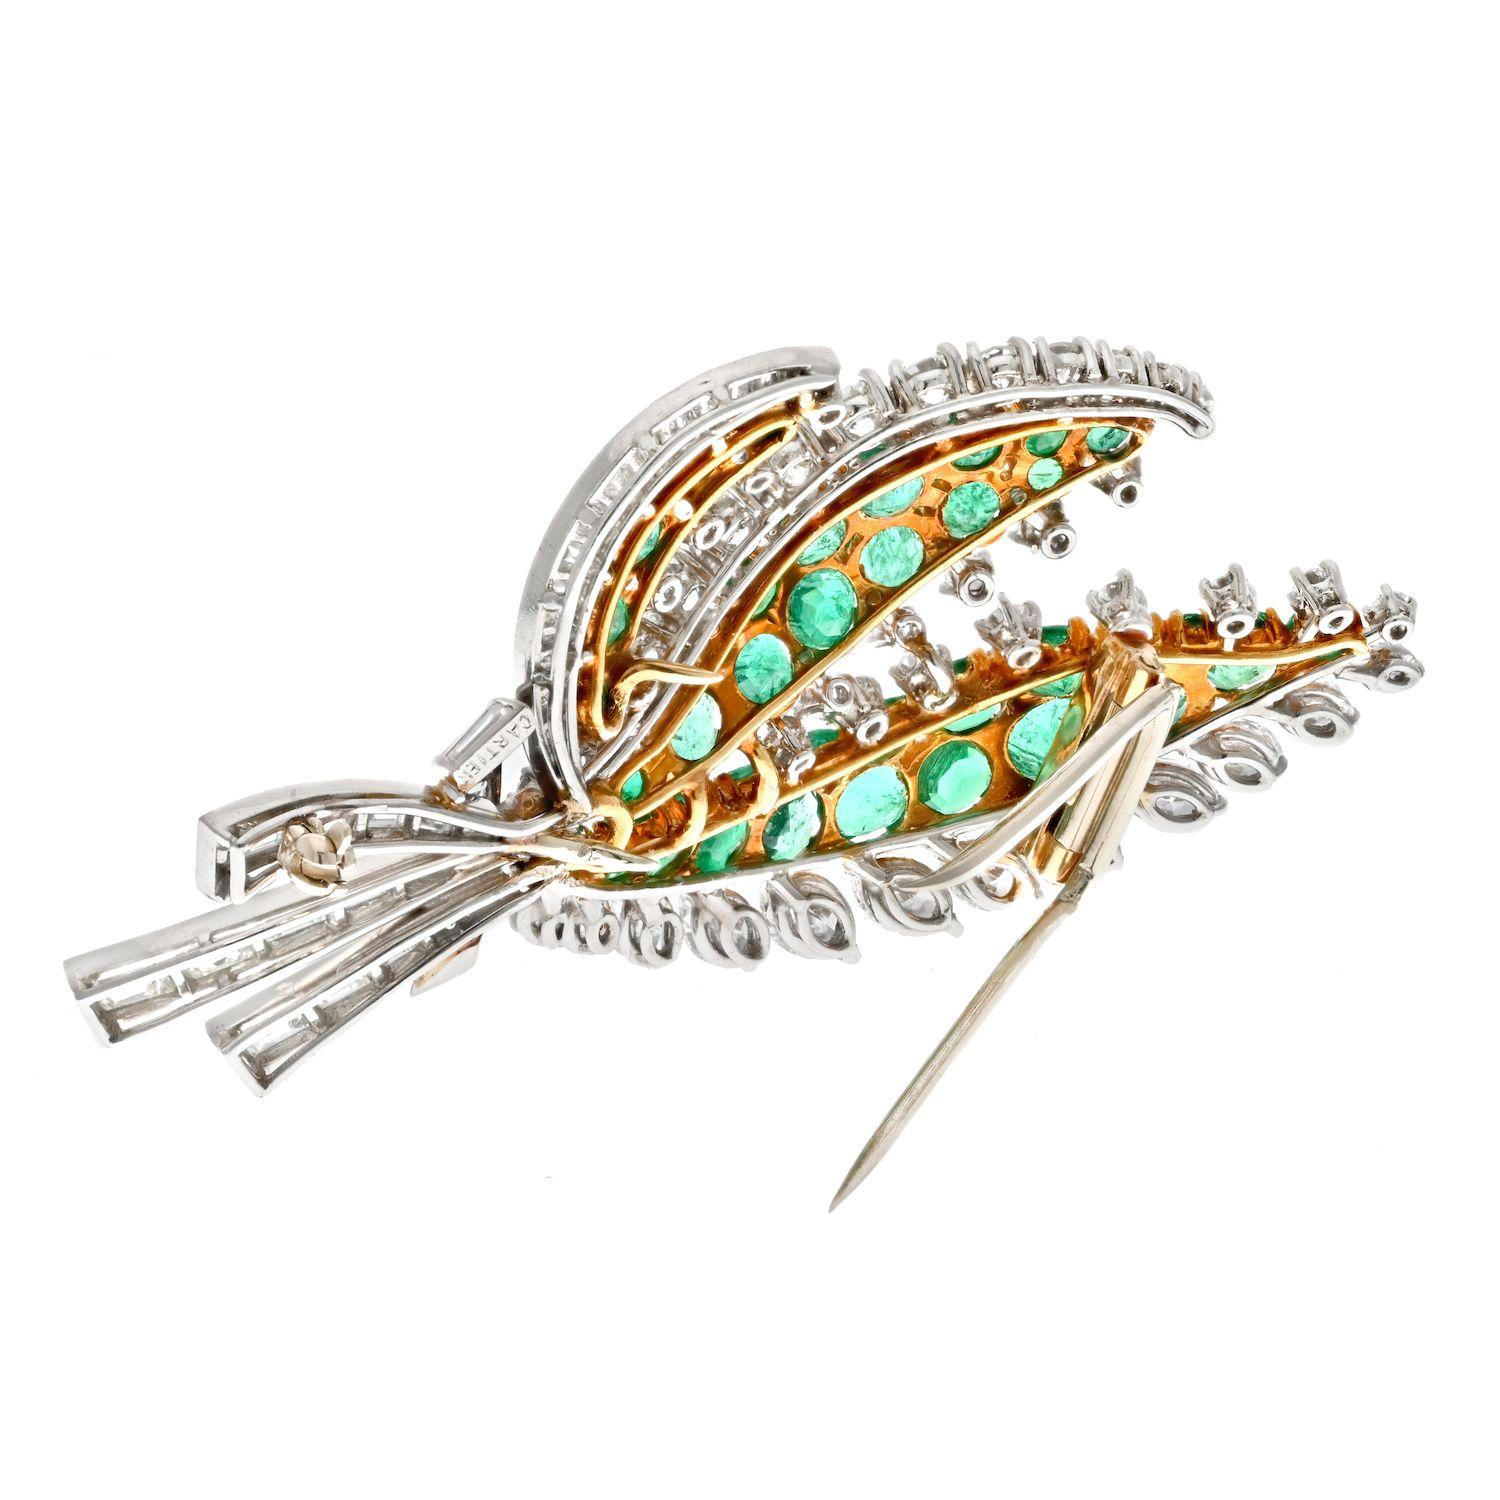 Marquise Cut Platinum & 18k Yellow Gold Diamond and Green Emerald Leaf Brooch